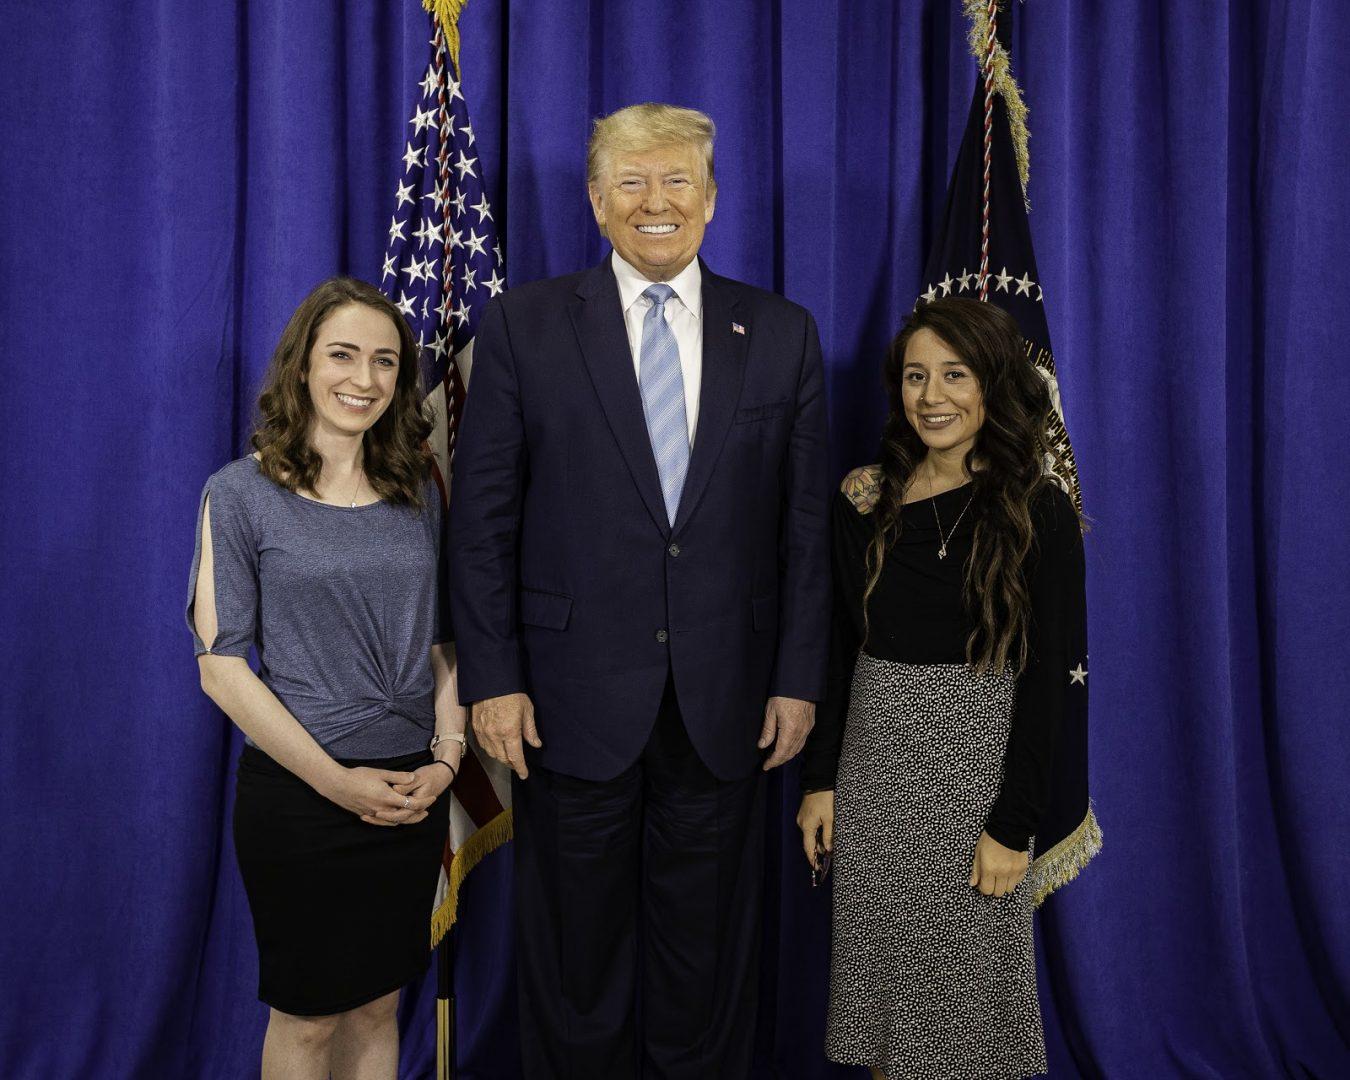 From left, Bernadette Tasy, President Donald Trump and Jessica Riojas pose for a photo before Tasy and Riojas speak at an Evangelicals for Trump event in South Florida on Friday, Jan. 3, 2020. Photo courtesy of Bernadette Tasy.
